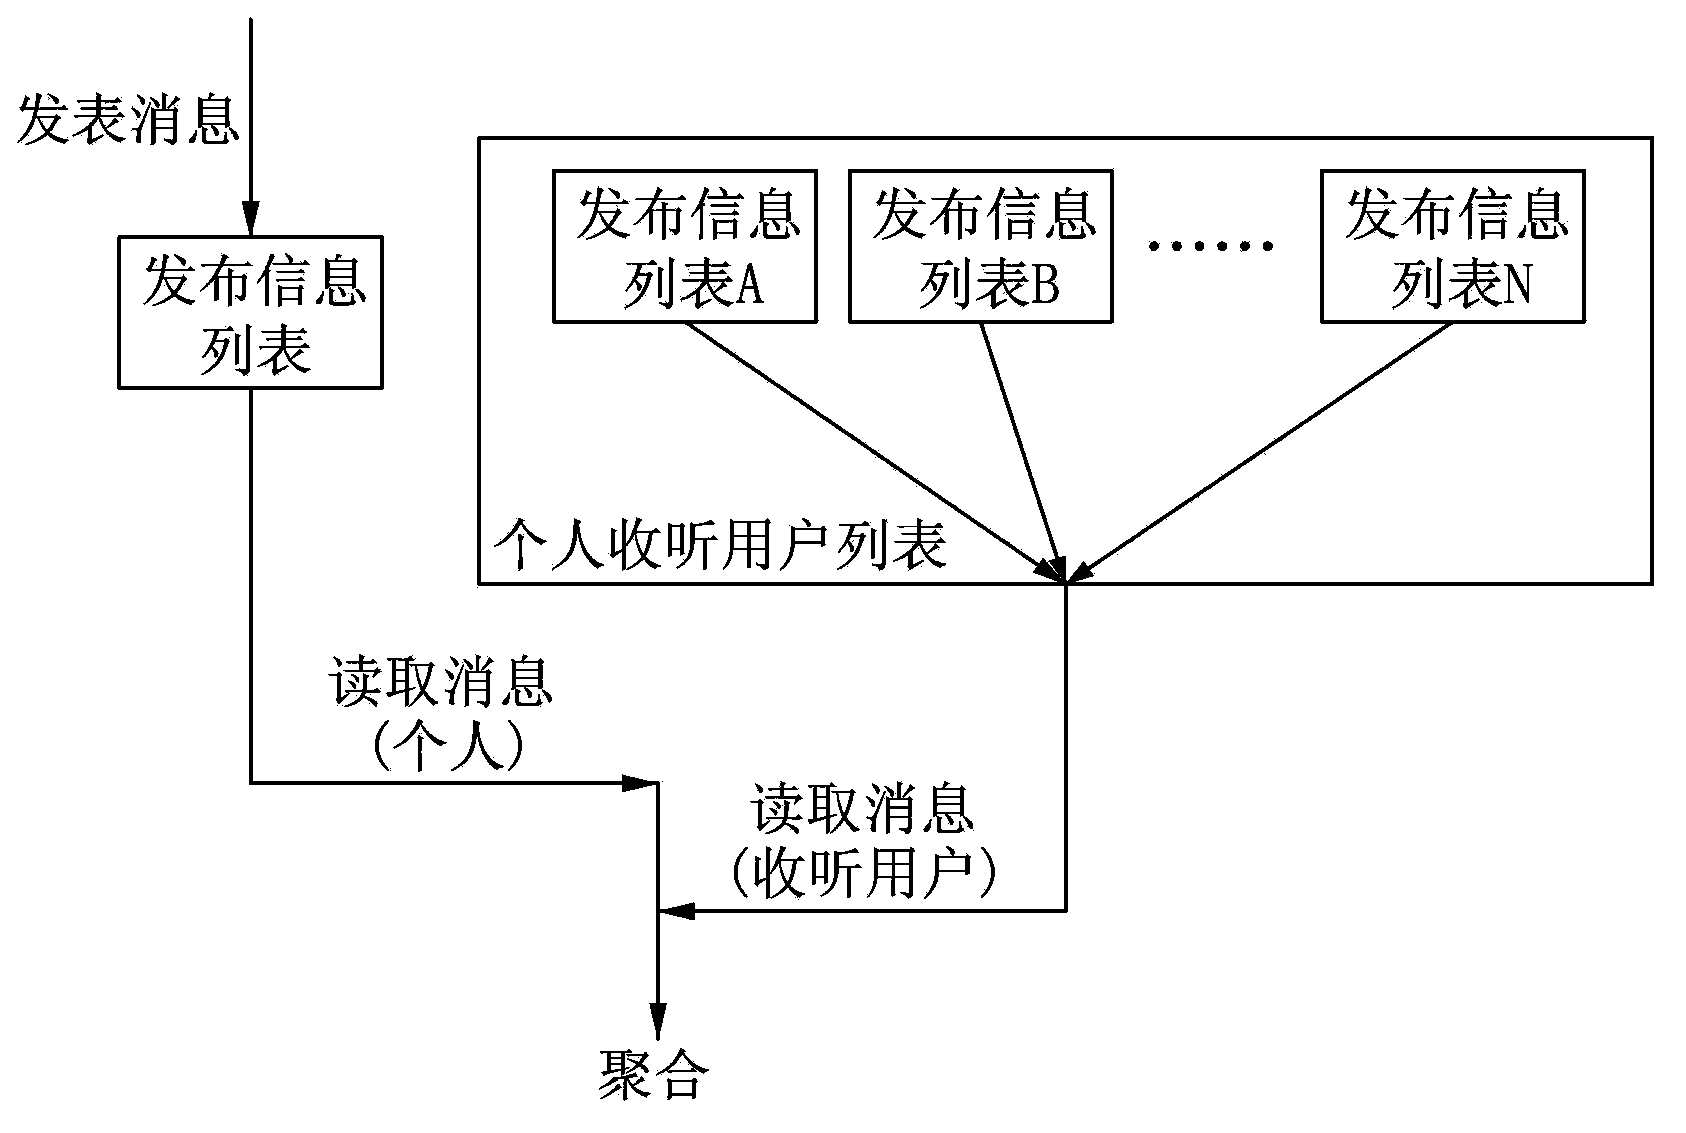 Social network information processing method and system